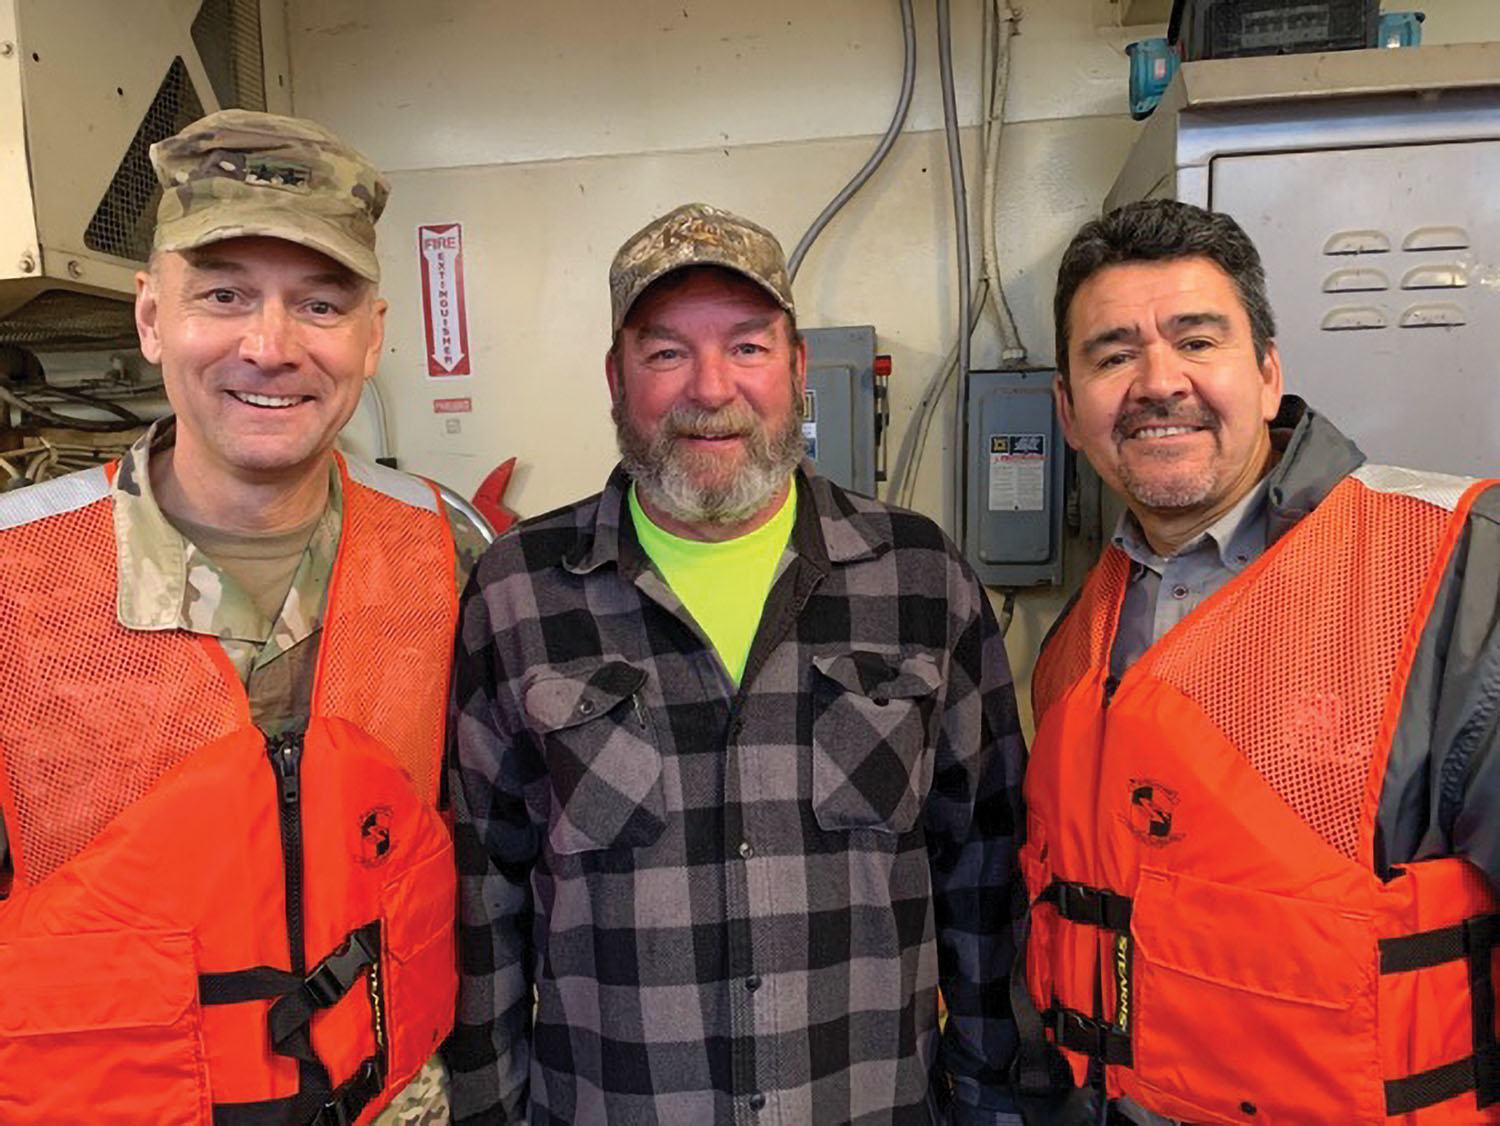 From left, Corps Deputy Commanding General William “Butch” Graham; Brian Ragsdale, master of the Dredge Potter; and Assisstant Secretary of the Army-Civil Works Michael Connor. (Photo courtesy of St. Louis Engineer District)